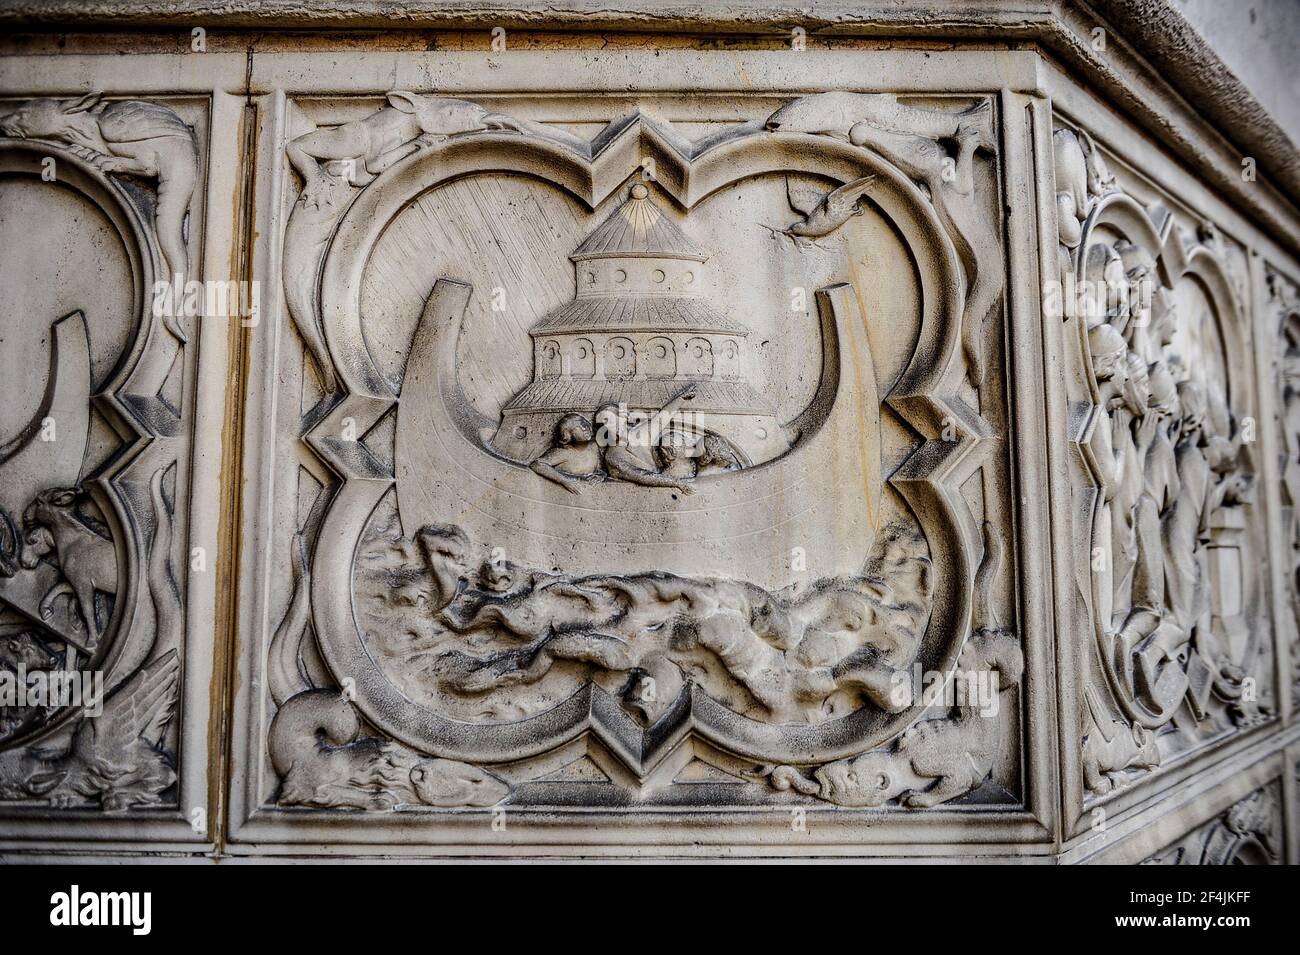 Paris, France - July 18, 2019: Bas relief at the Sainte Chapelle royal chapel in Paris, France, depicting the Armenian Zvartnots cathedral on Noah Ark Stock Photo